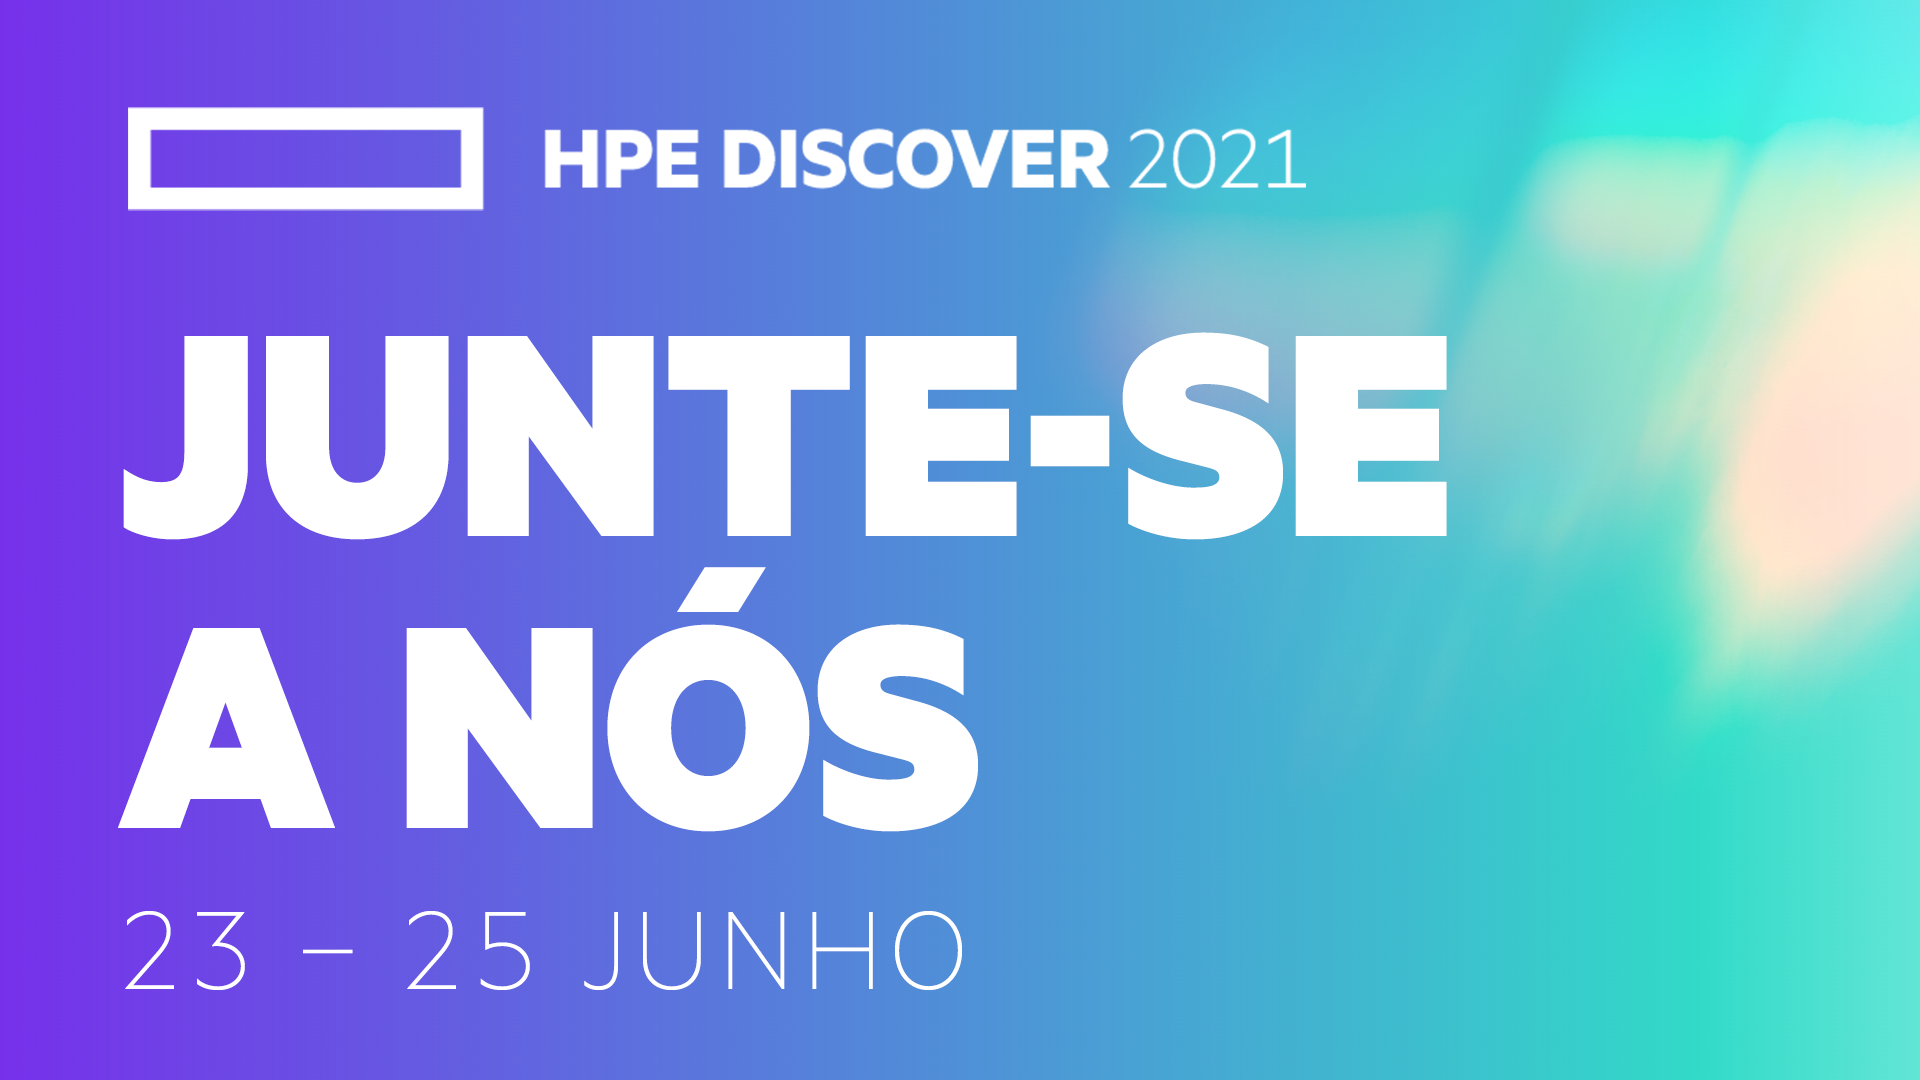 Claranet at HPE Discover 2021